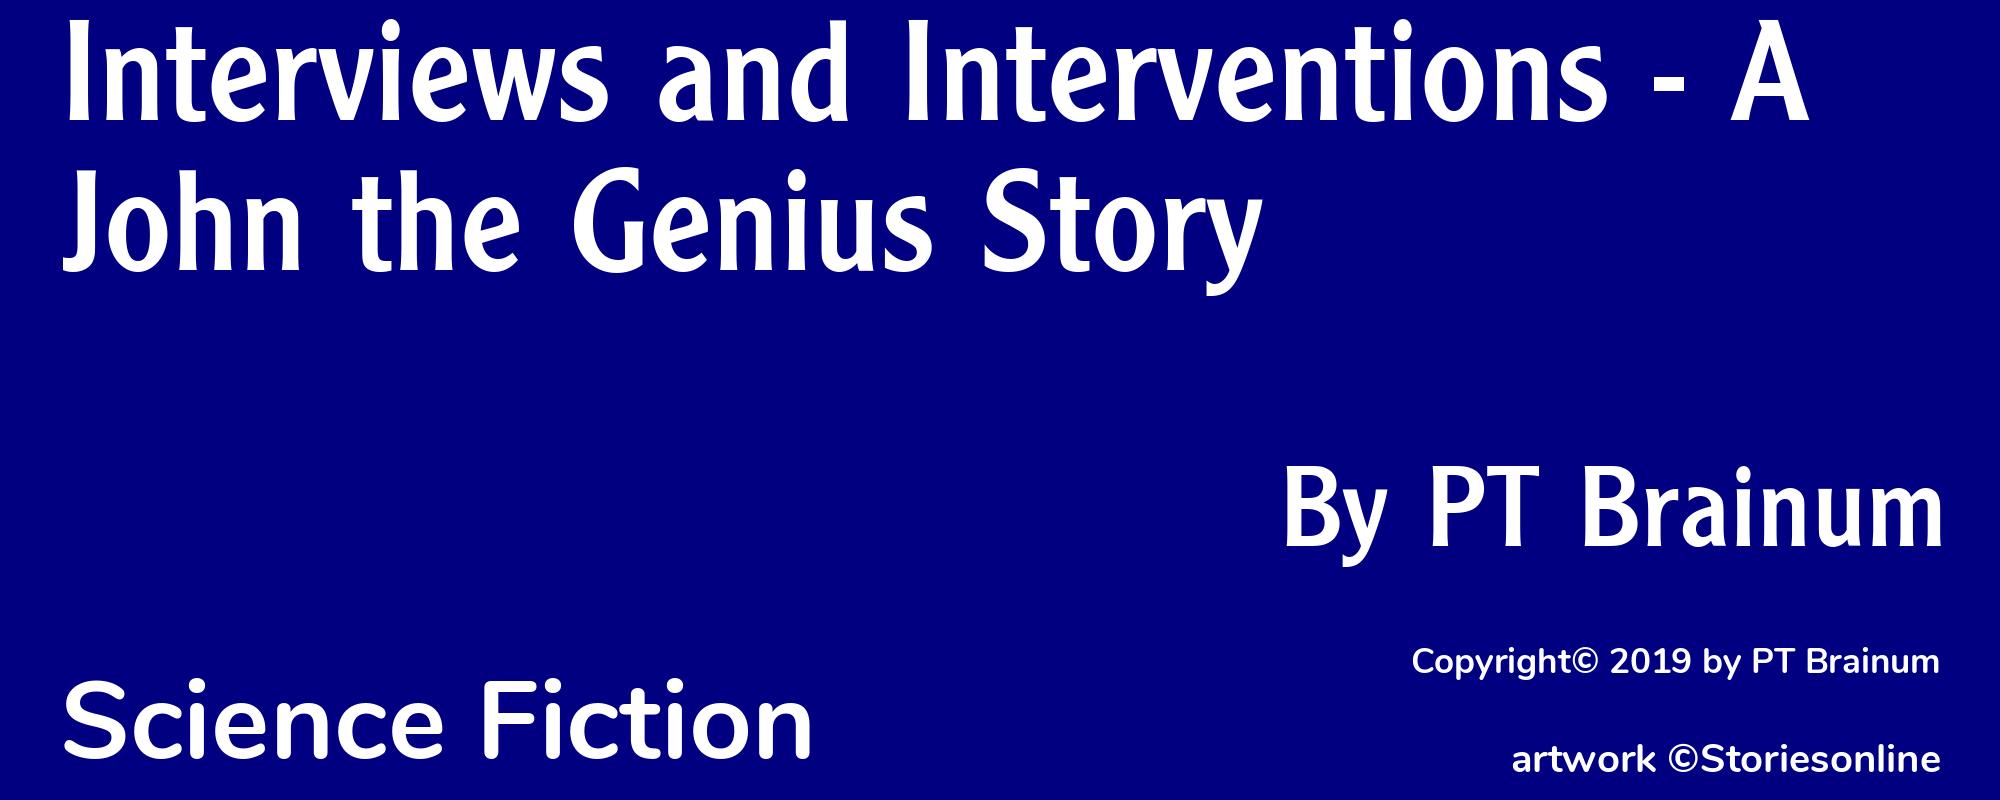 Interviews and Interventions - A John the Genius Story - Cover